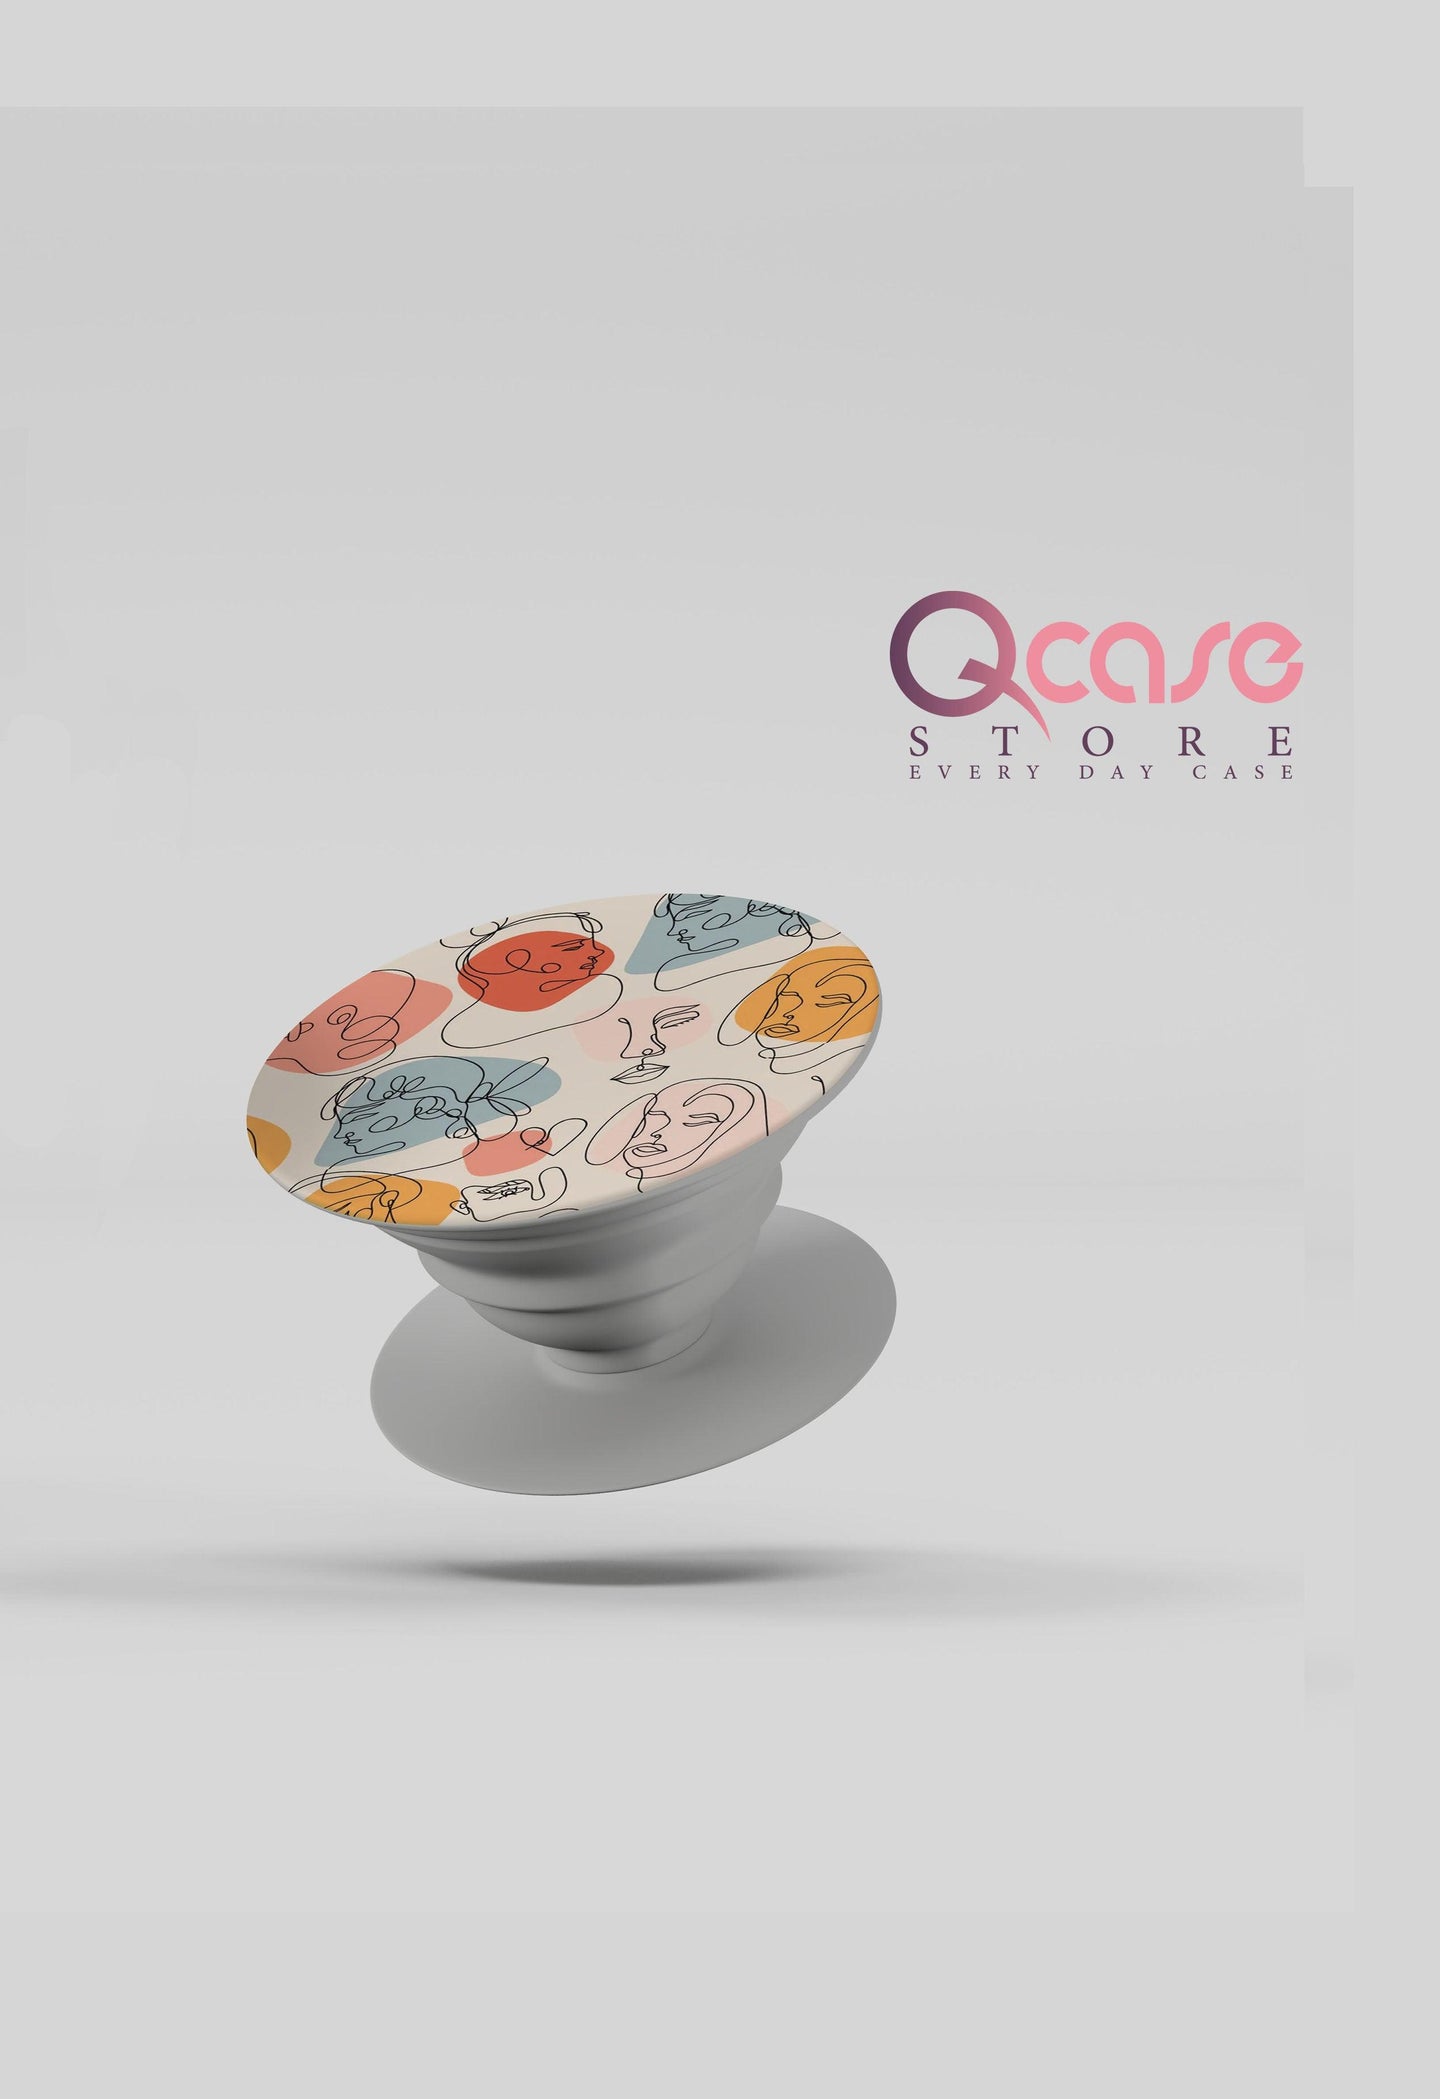 abstract popsocket - Qcase Store | Everyday Case